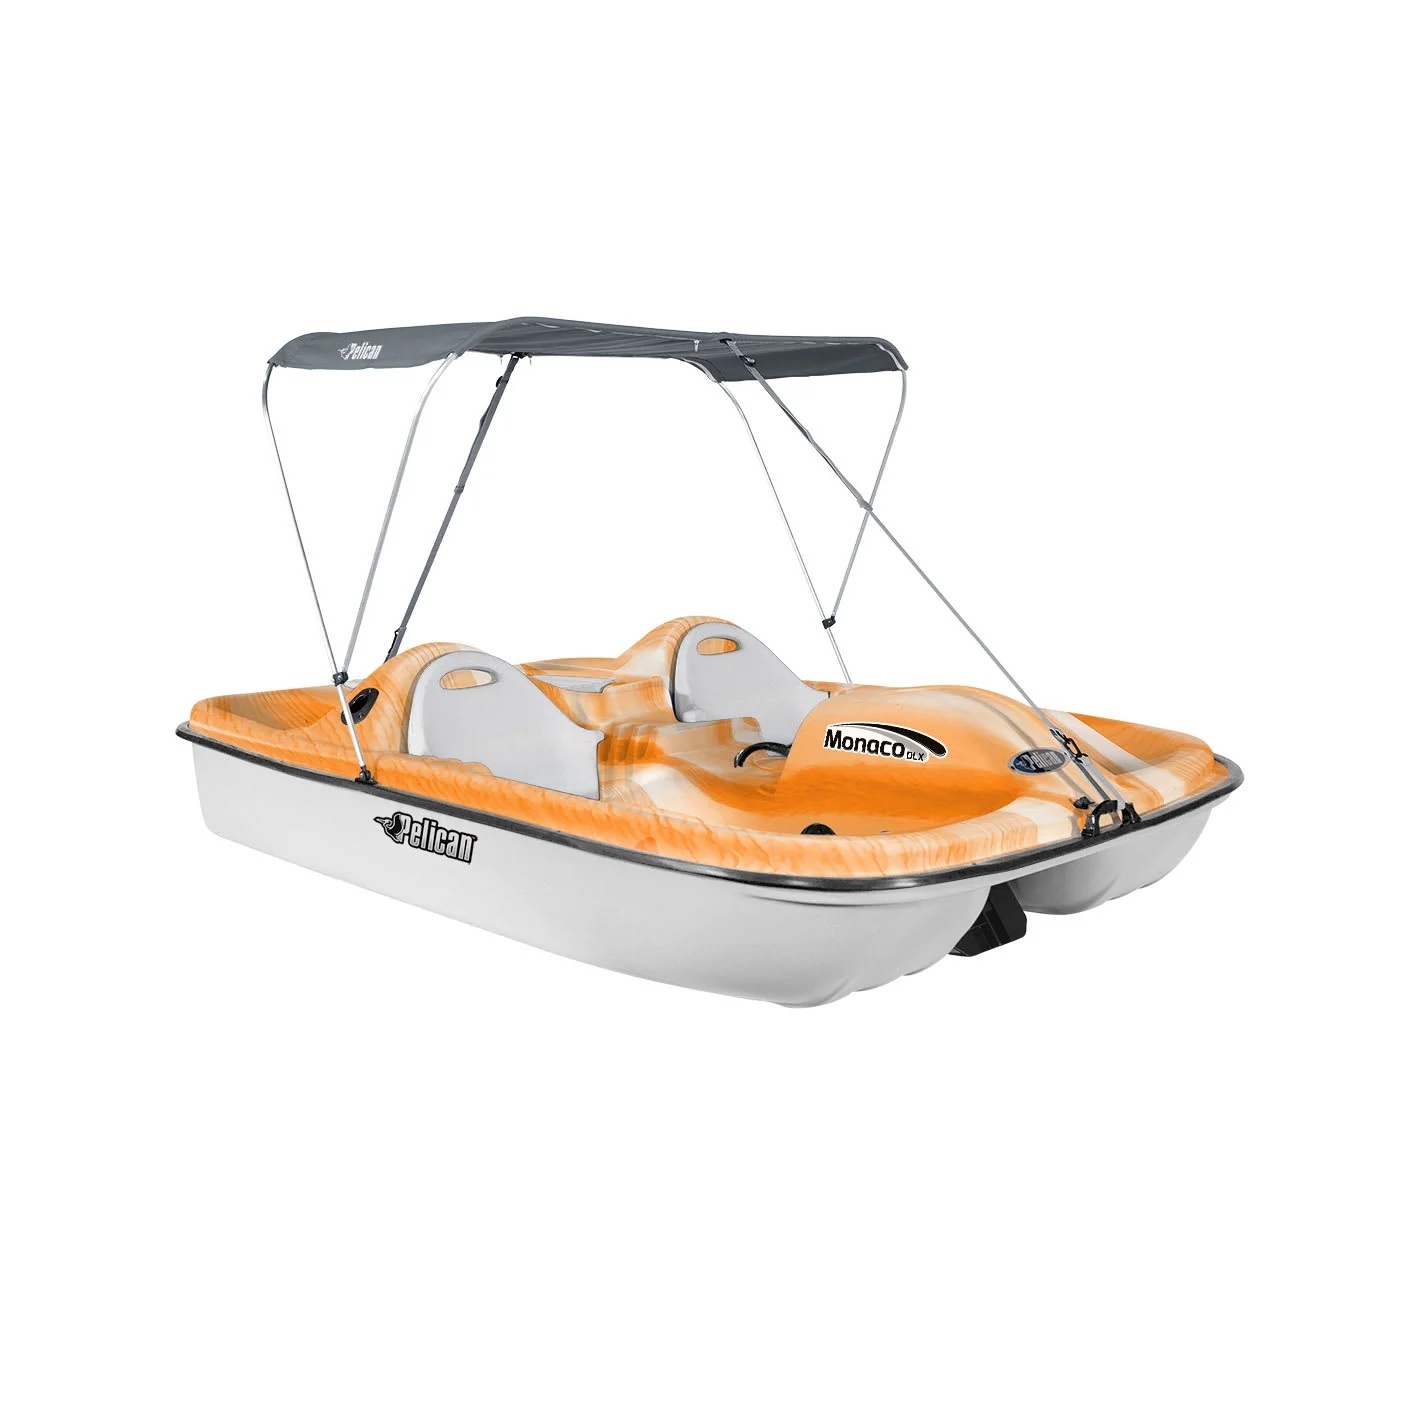 Bass Pro Shops Pedal Prowler Pedal Boat With Canopy, 42% OFF